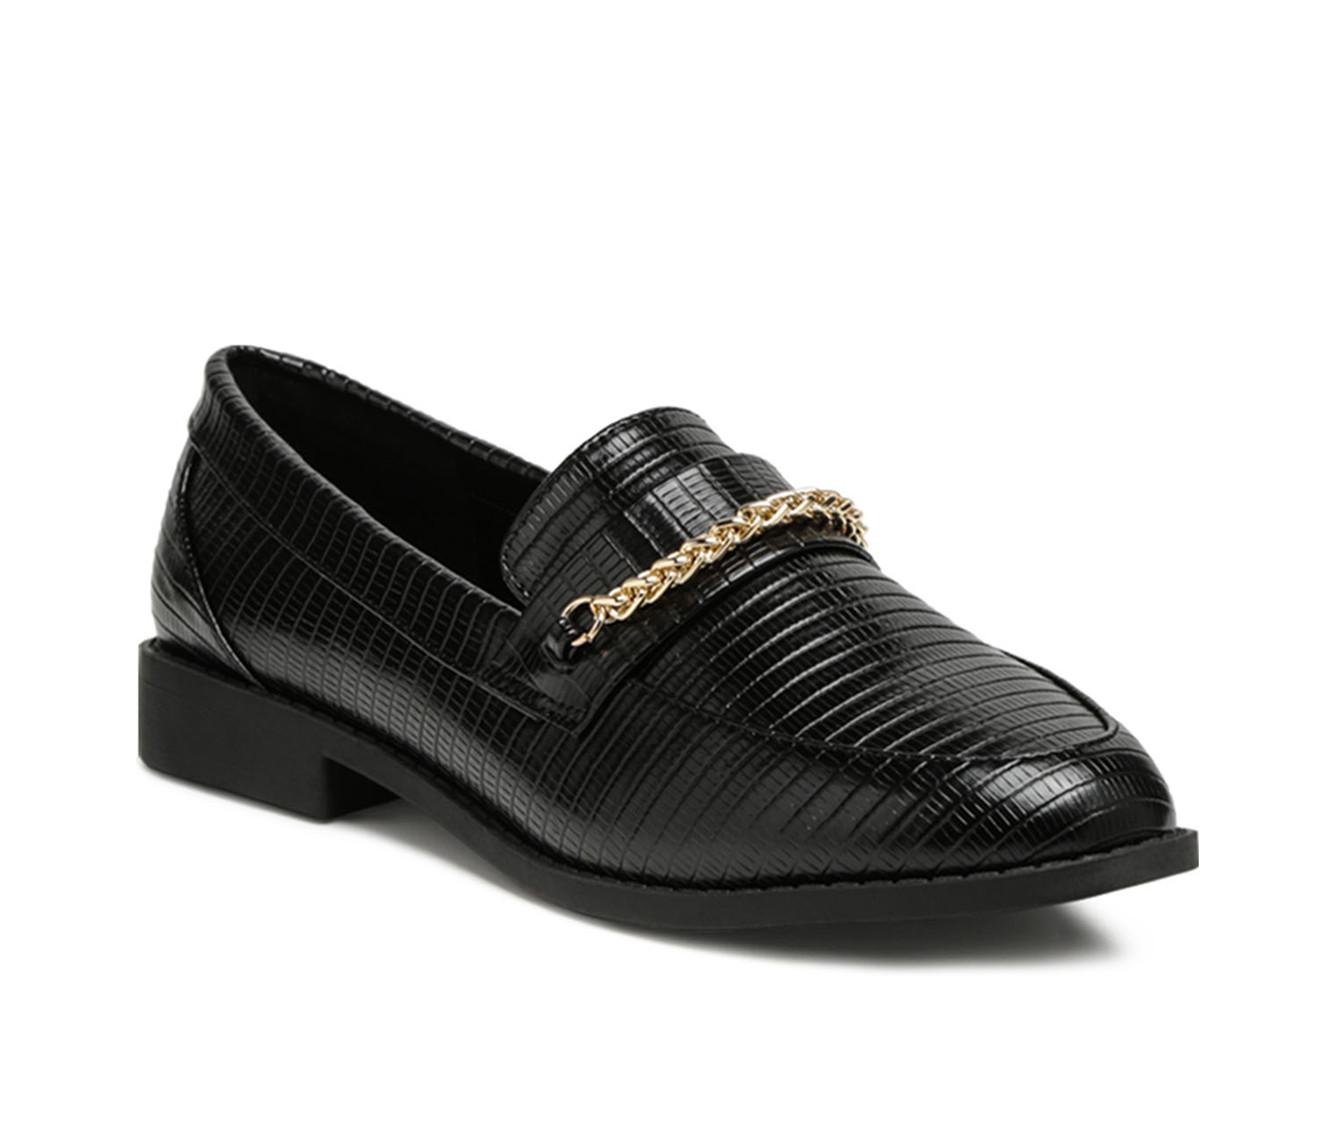 Women's London Rag Crypt Loafers